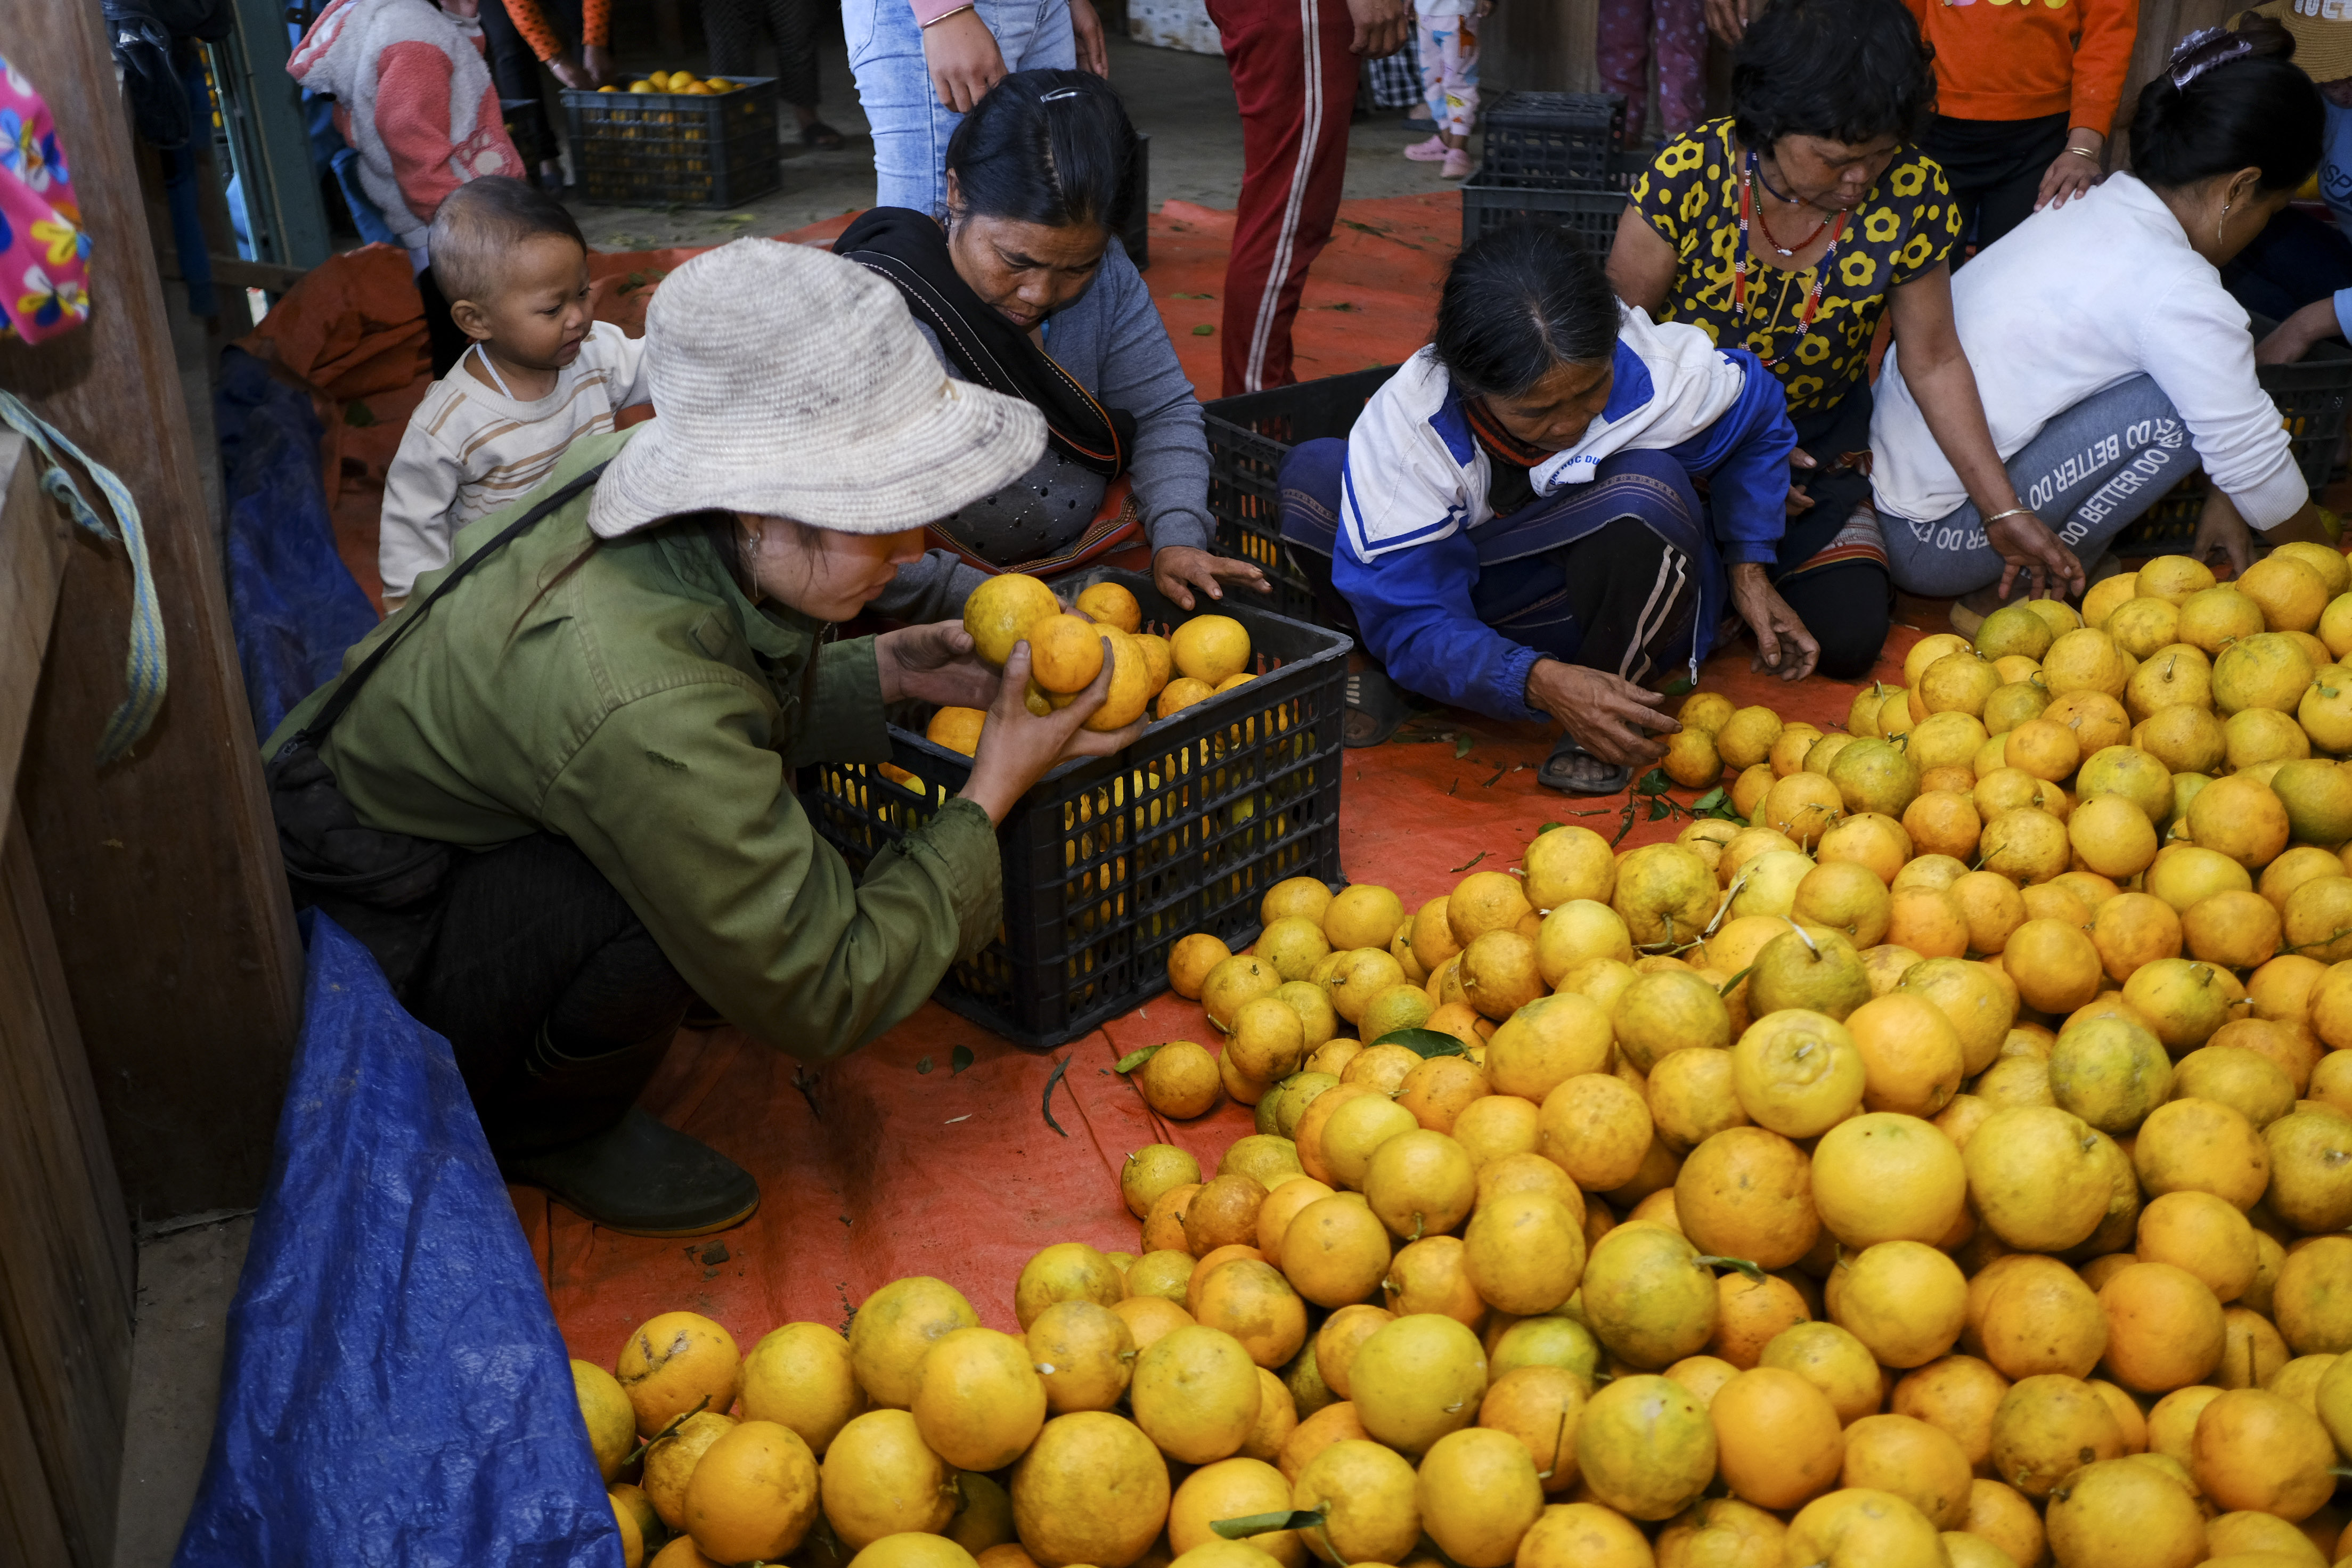 Residents put mountain oranges into baskets before the fruits are transported to other localities for sale. Photo: Tuoi Tre